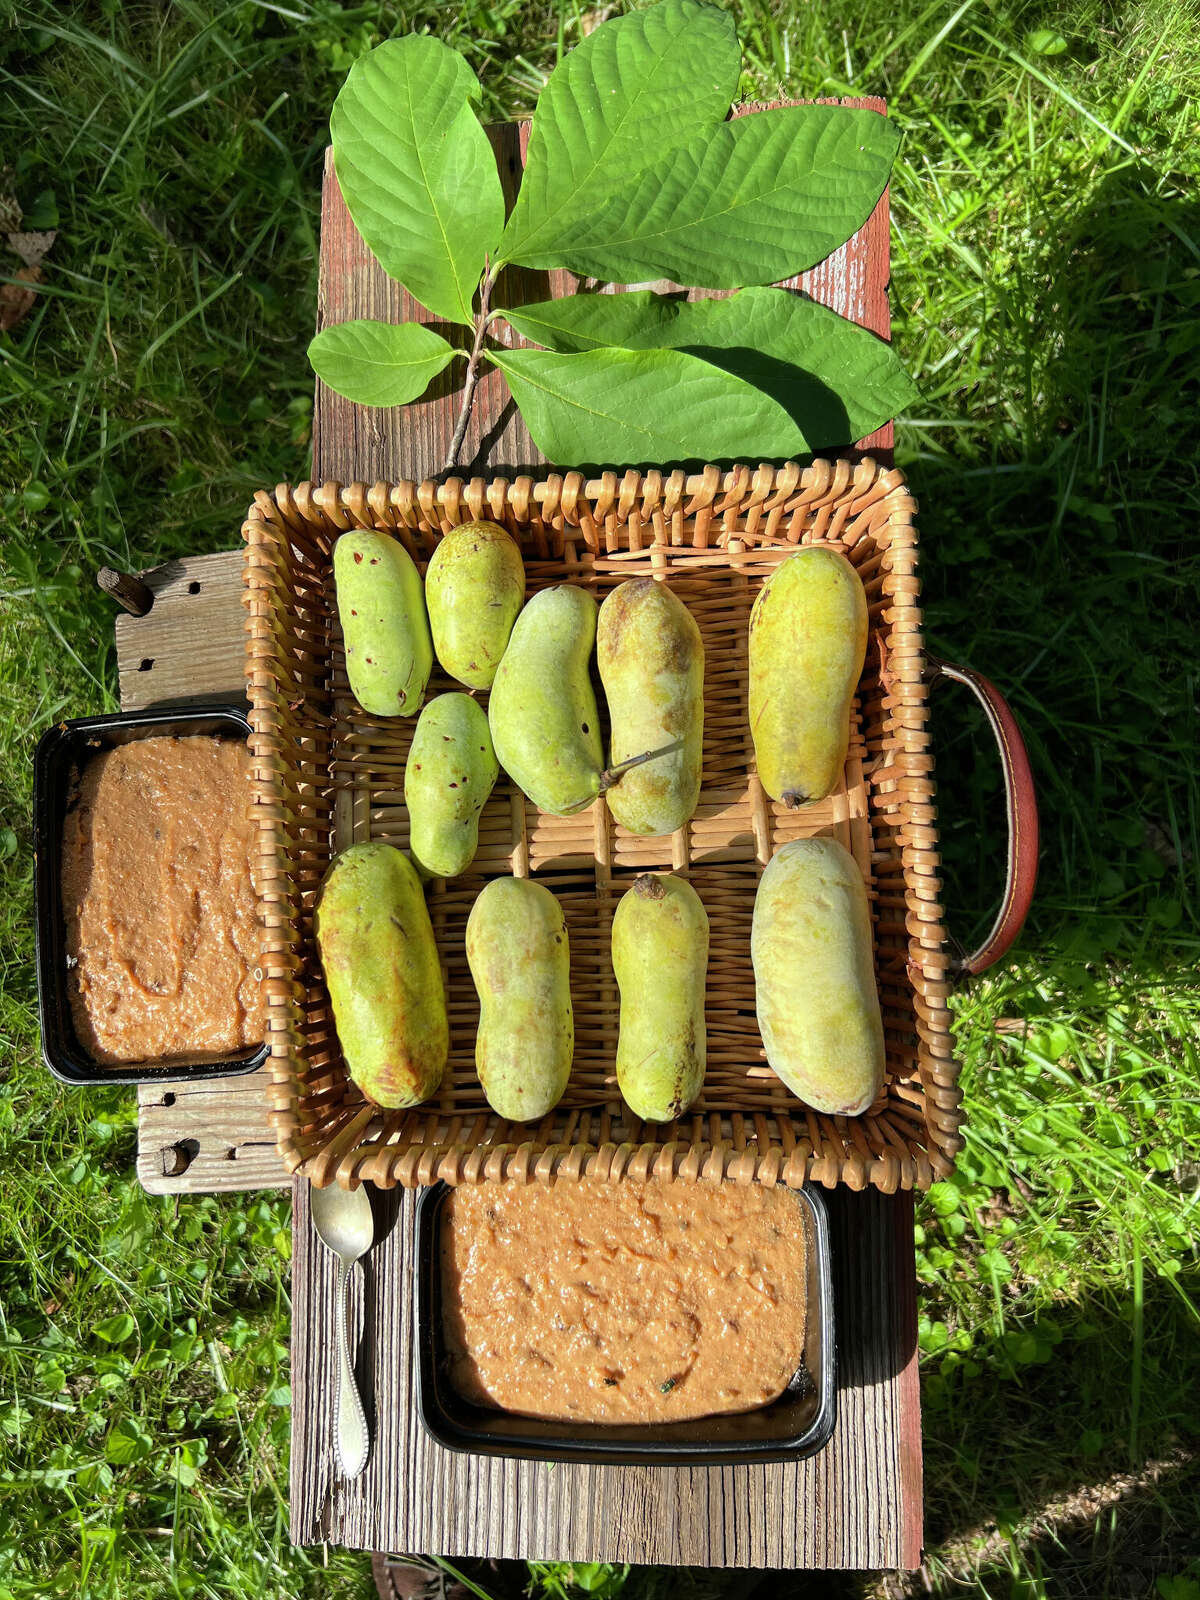 Gary Vondrasek, of Edwardsville, displays his own pawpaw pudding, from his own recipe, along with a display of pawpaw fruits harvested from his own backyard, in his own backyard. He accompanied the display with a leaf spread, which is important in identifying this tree species.